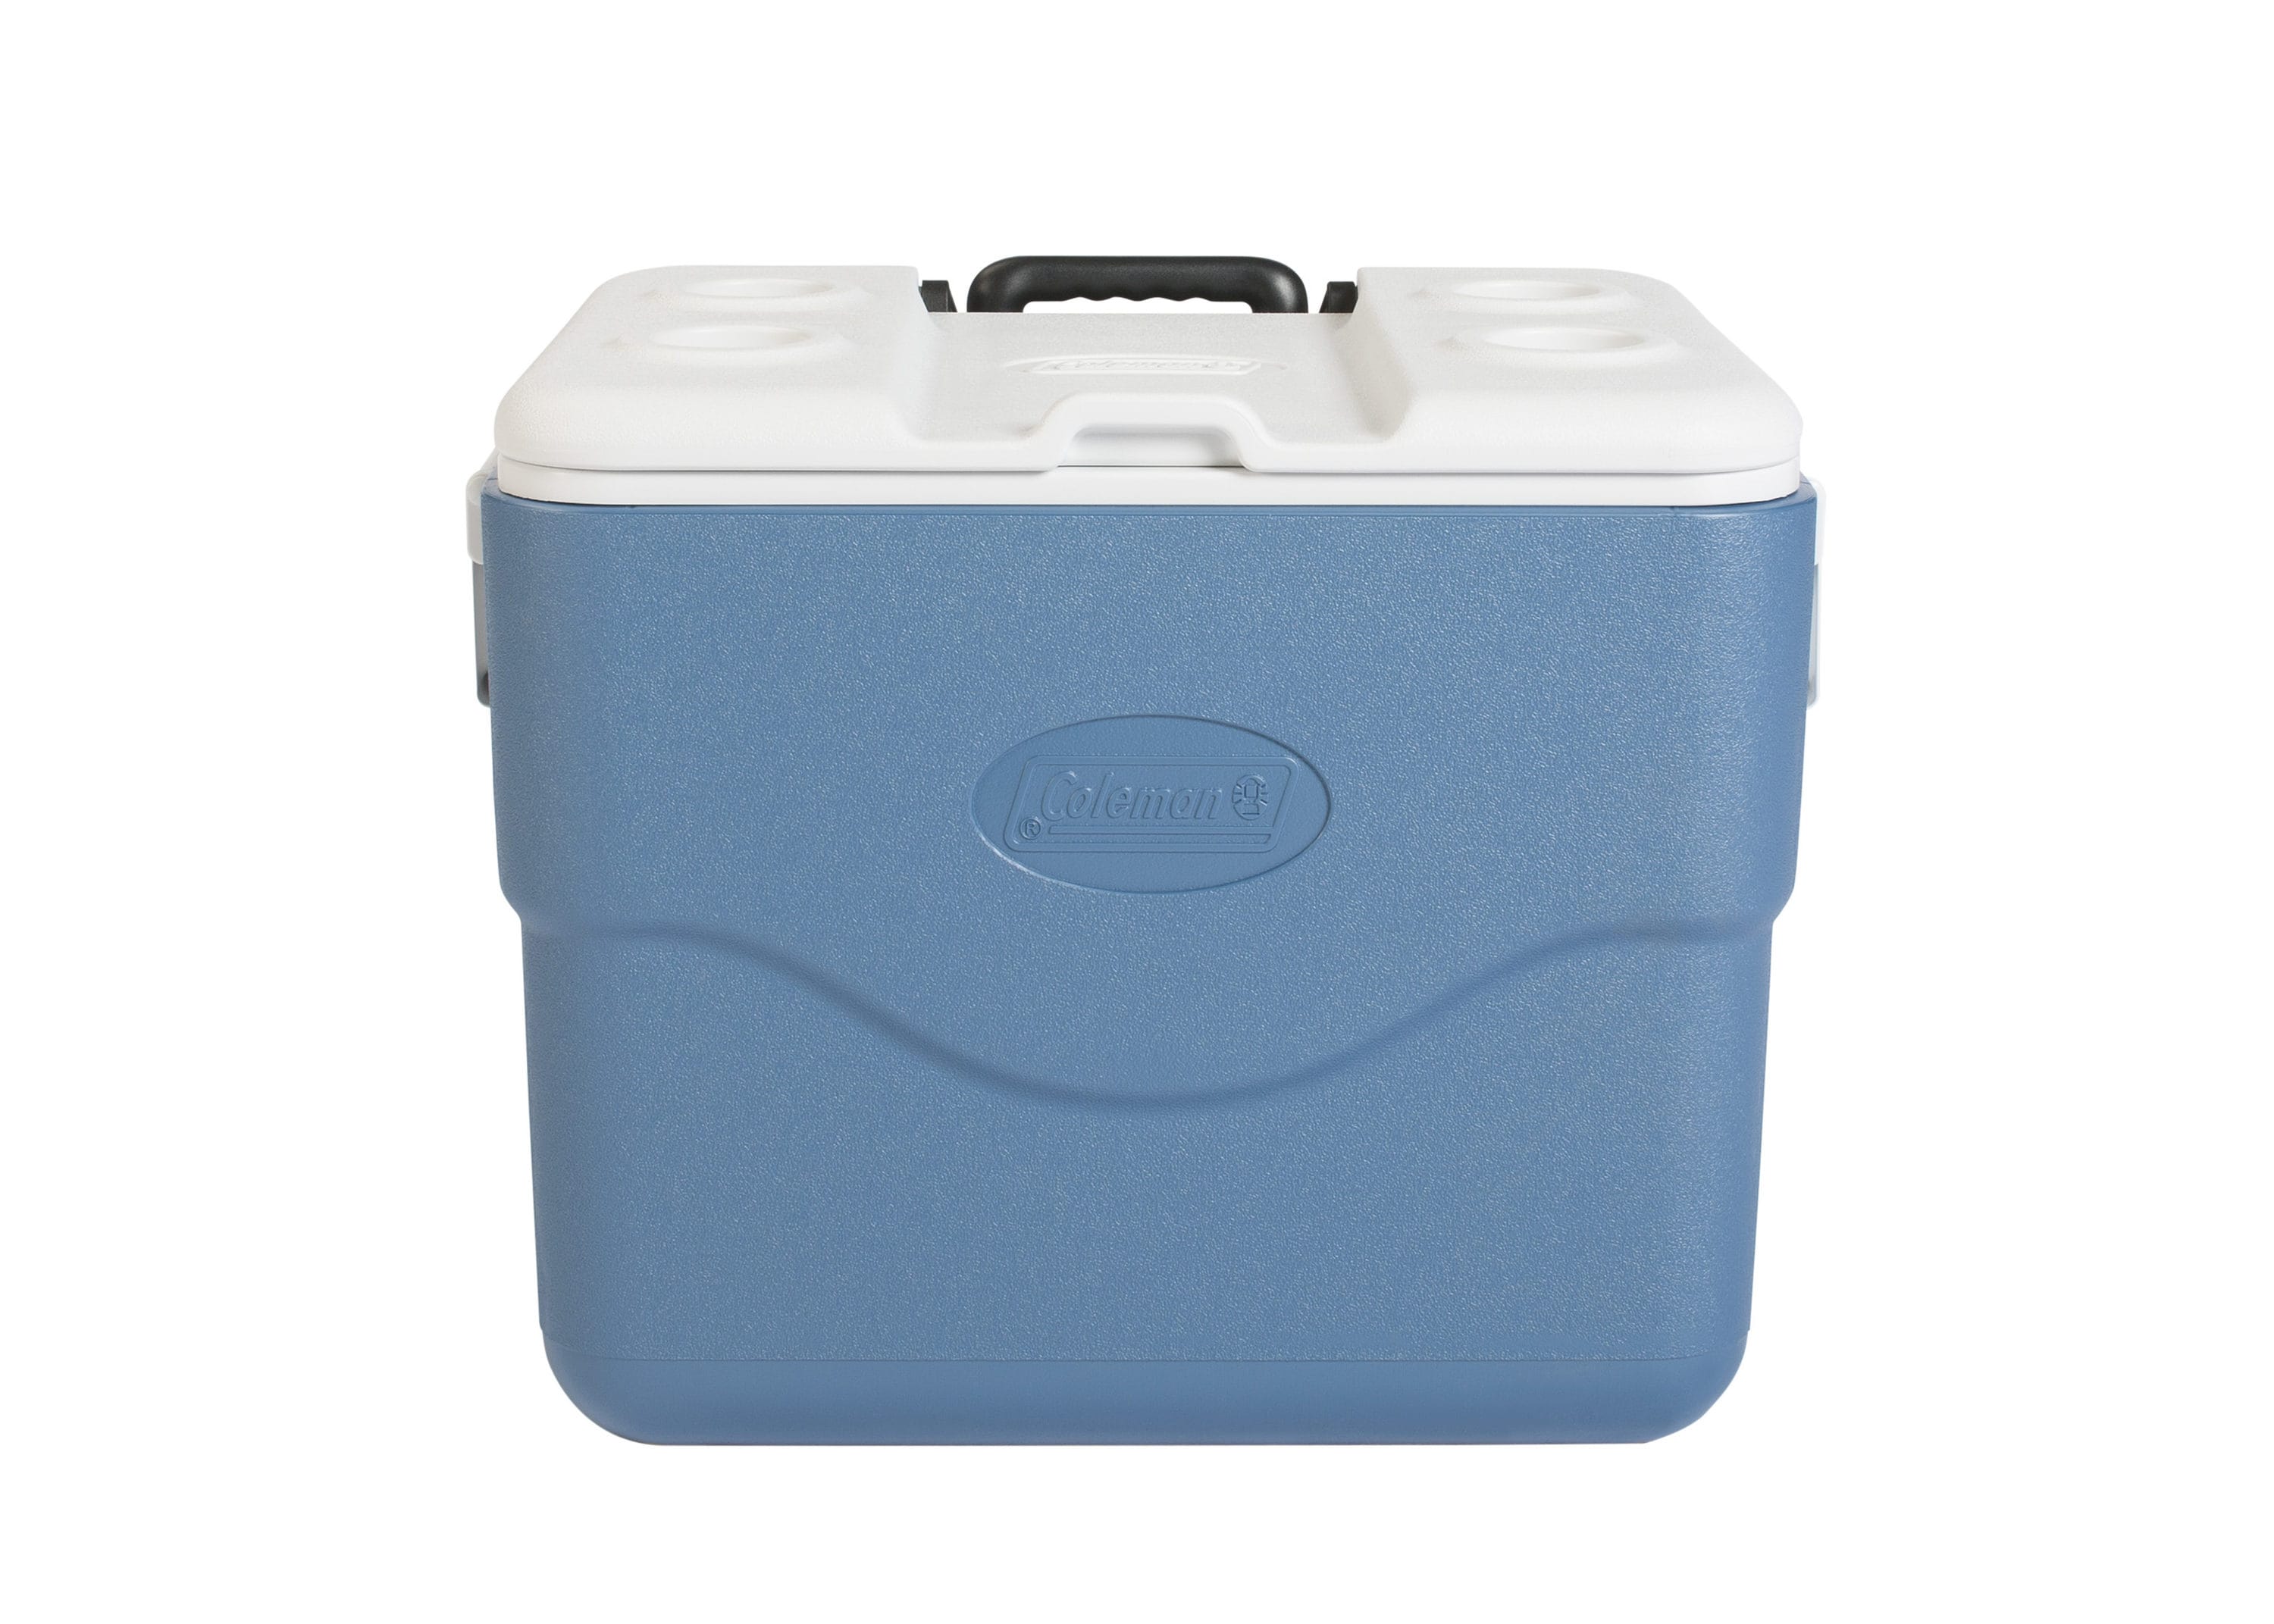 Coleman 75-Quart Wheeled Plastic Chest Cooler in the Portable 